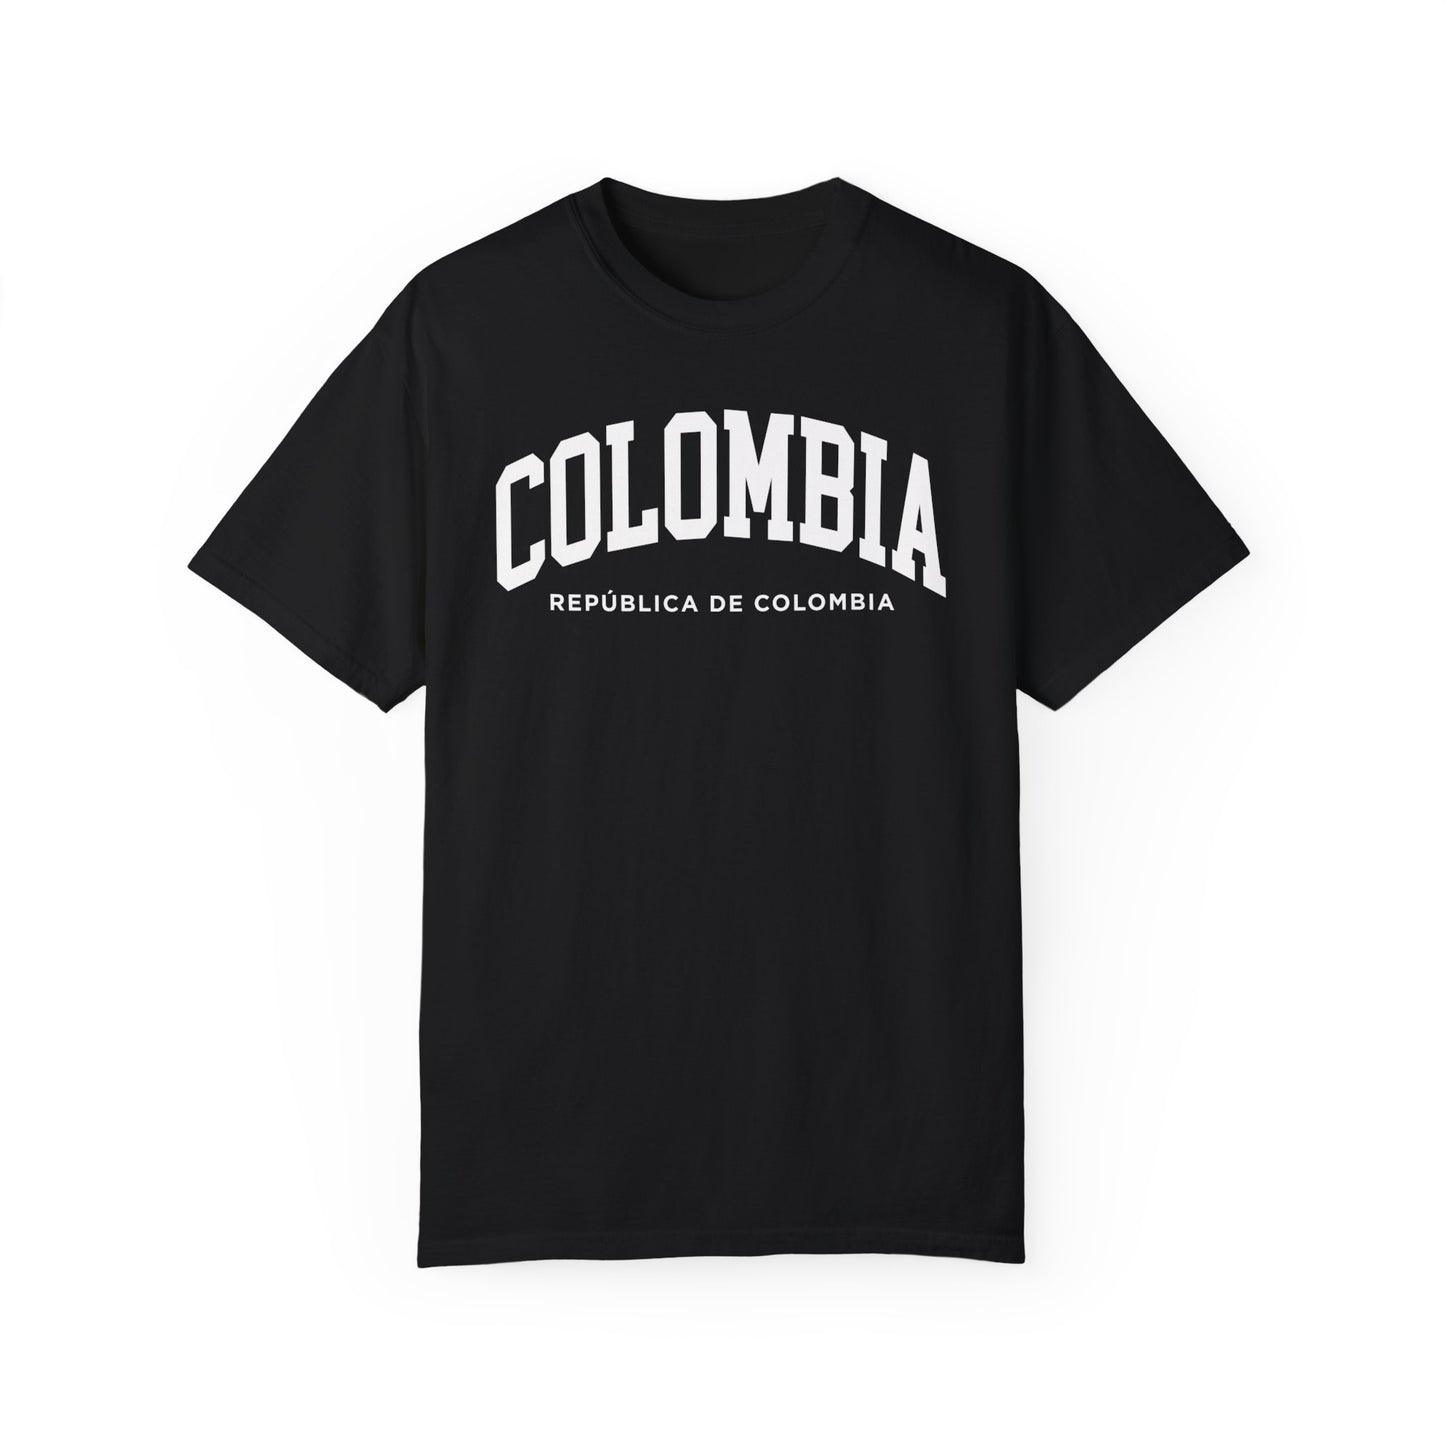 Colombia Comfort Colors® Tee